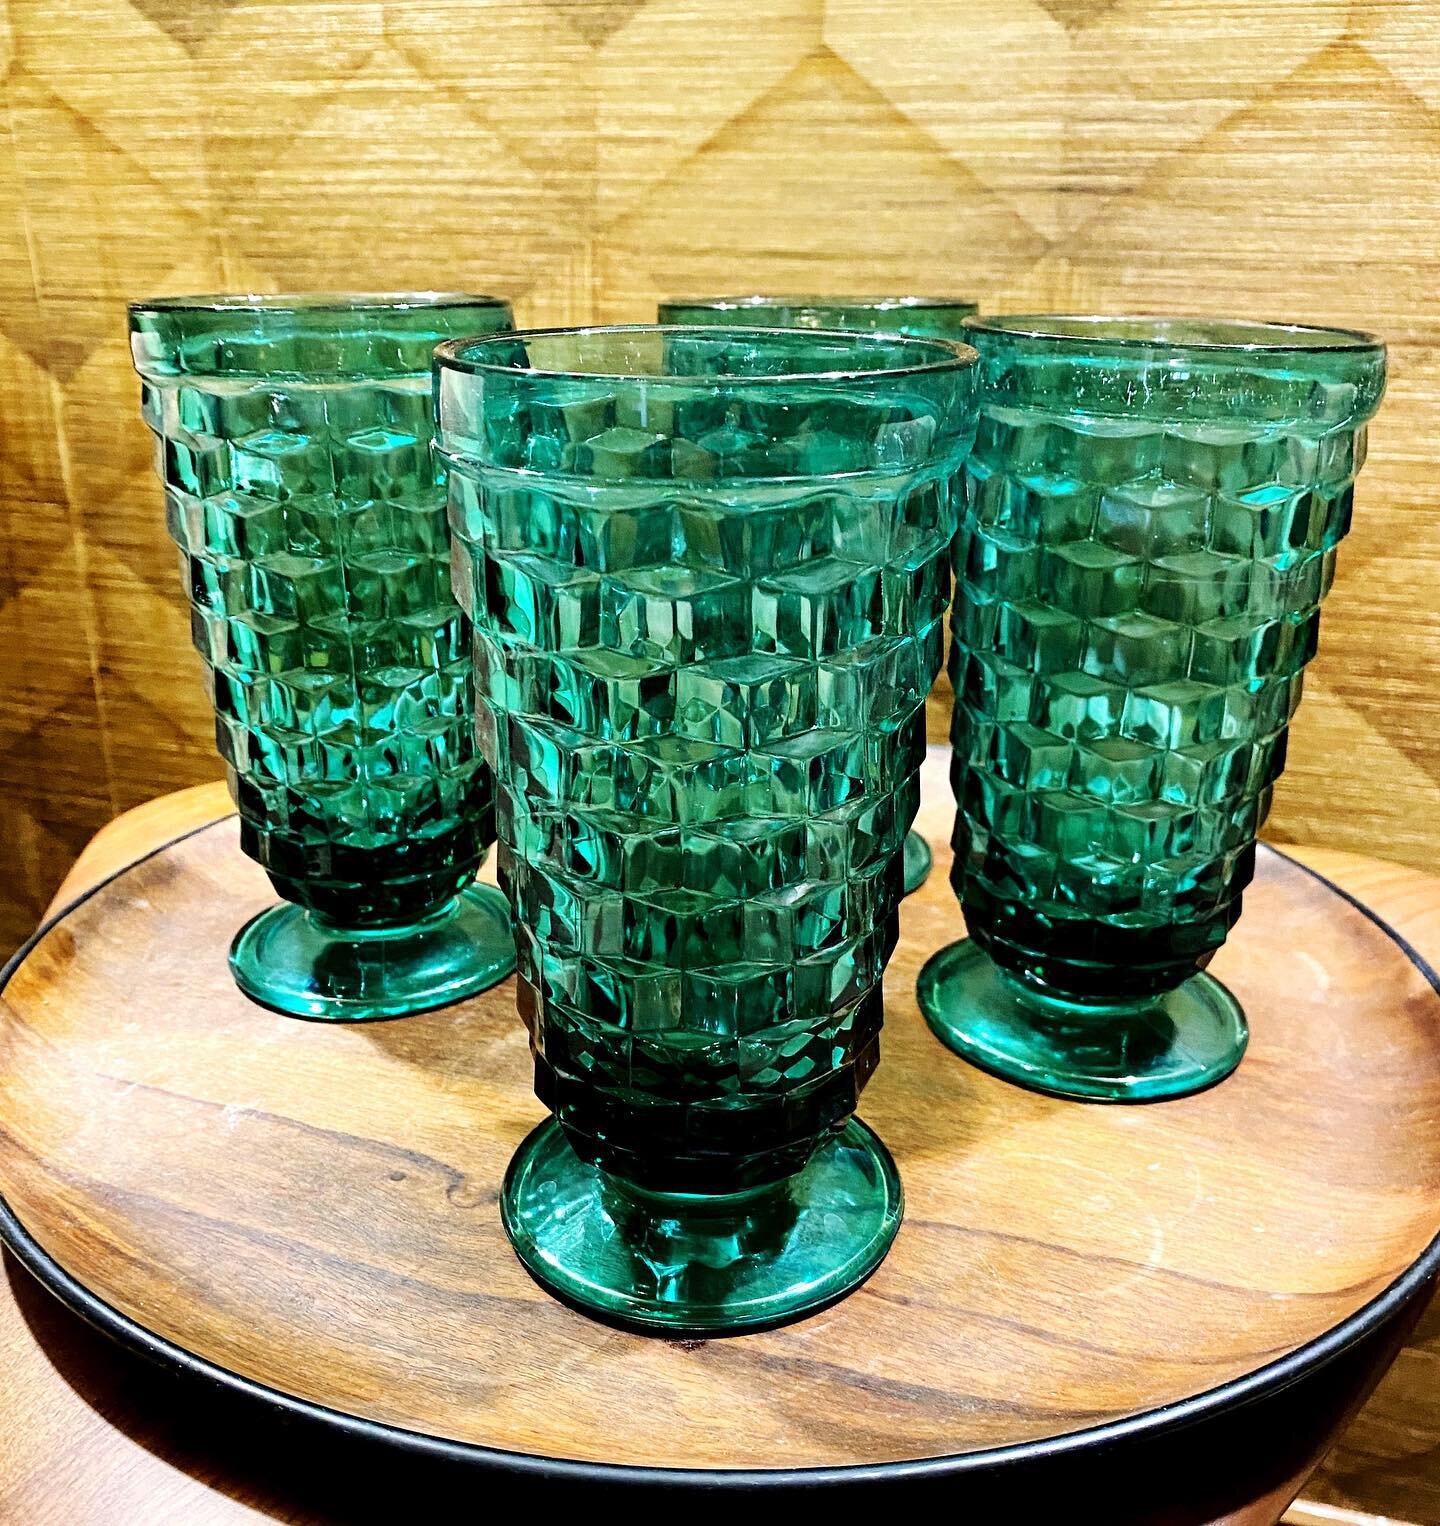 Bardo Shop vintage glassware ✨ᴘɪᴄᴋ ᴏғ ᴛʜᴇ ᴡᴇᴇᴋ✨

Vintage early 70s 💚#BardoGREEN💚glassware set with M.C. Escher style patterning. Set of 4 for $75&hellip; 2 sets available (or a total of 8).

Perfect for spritzes, slushies or pool party drinks&helli